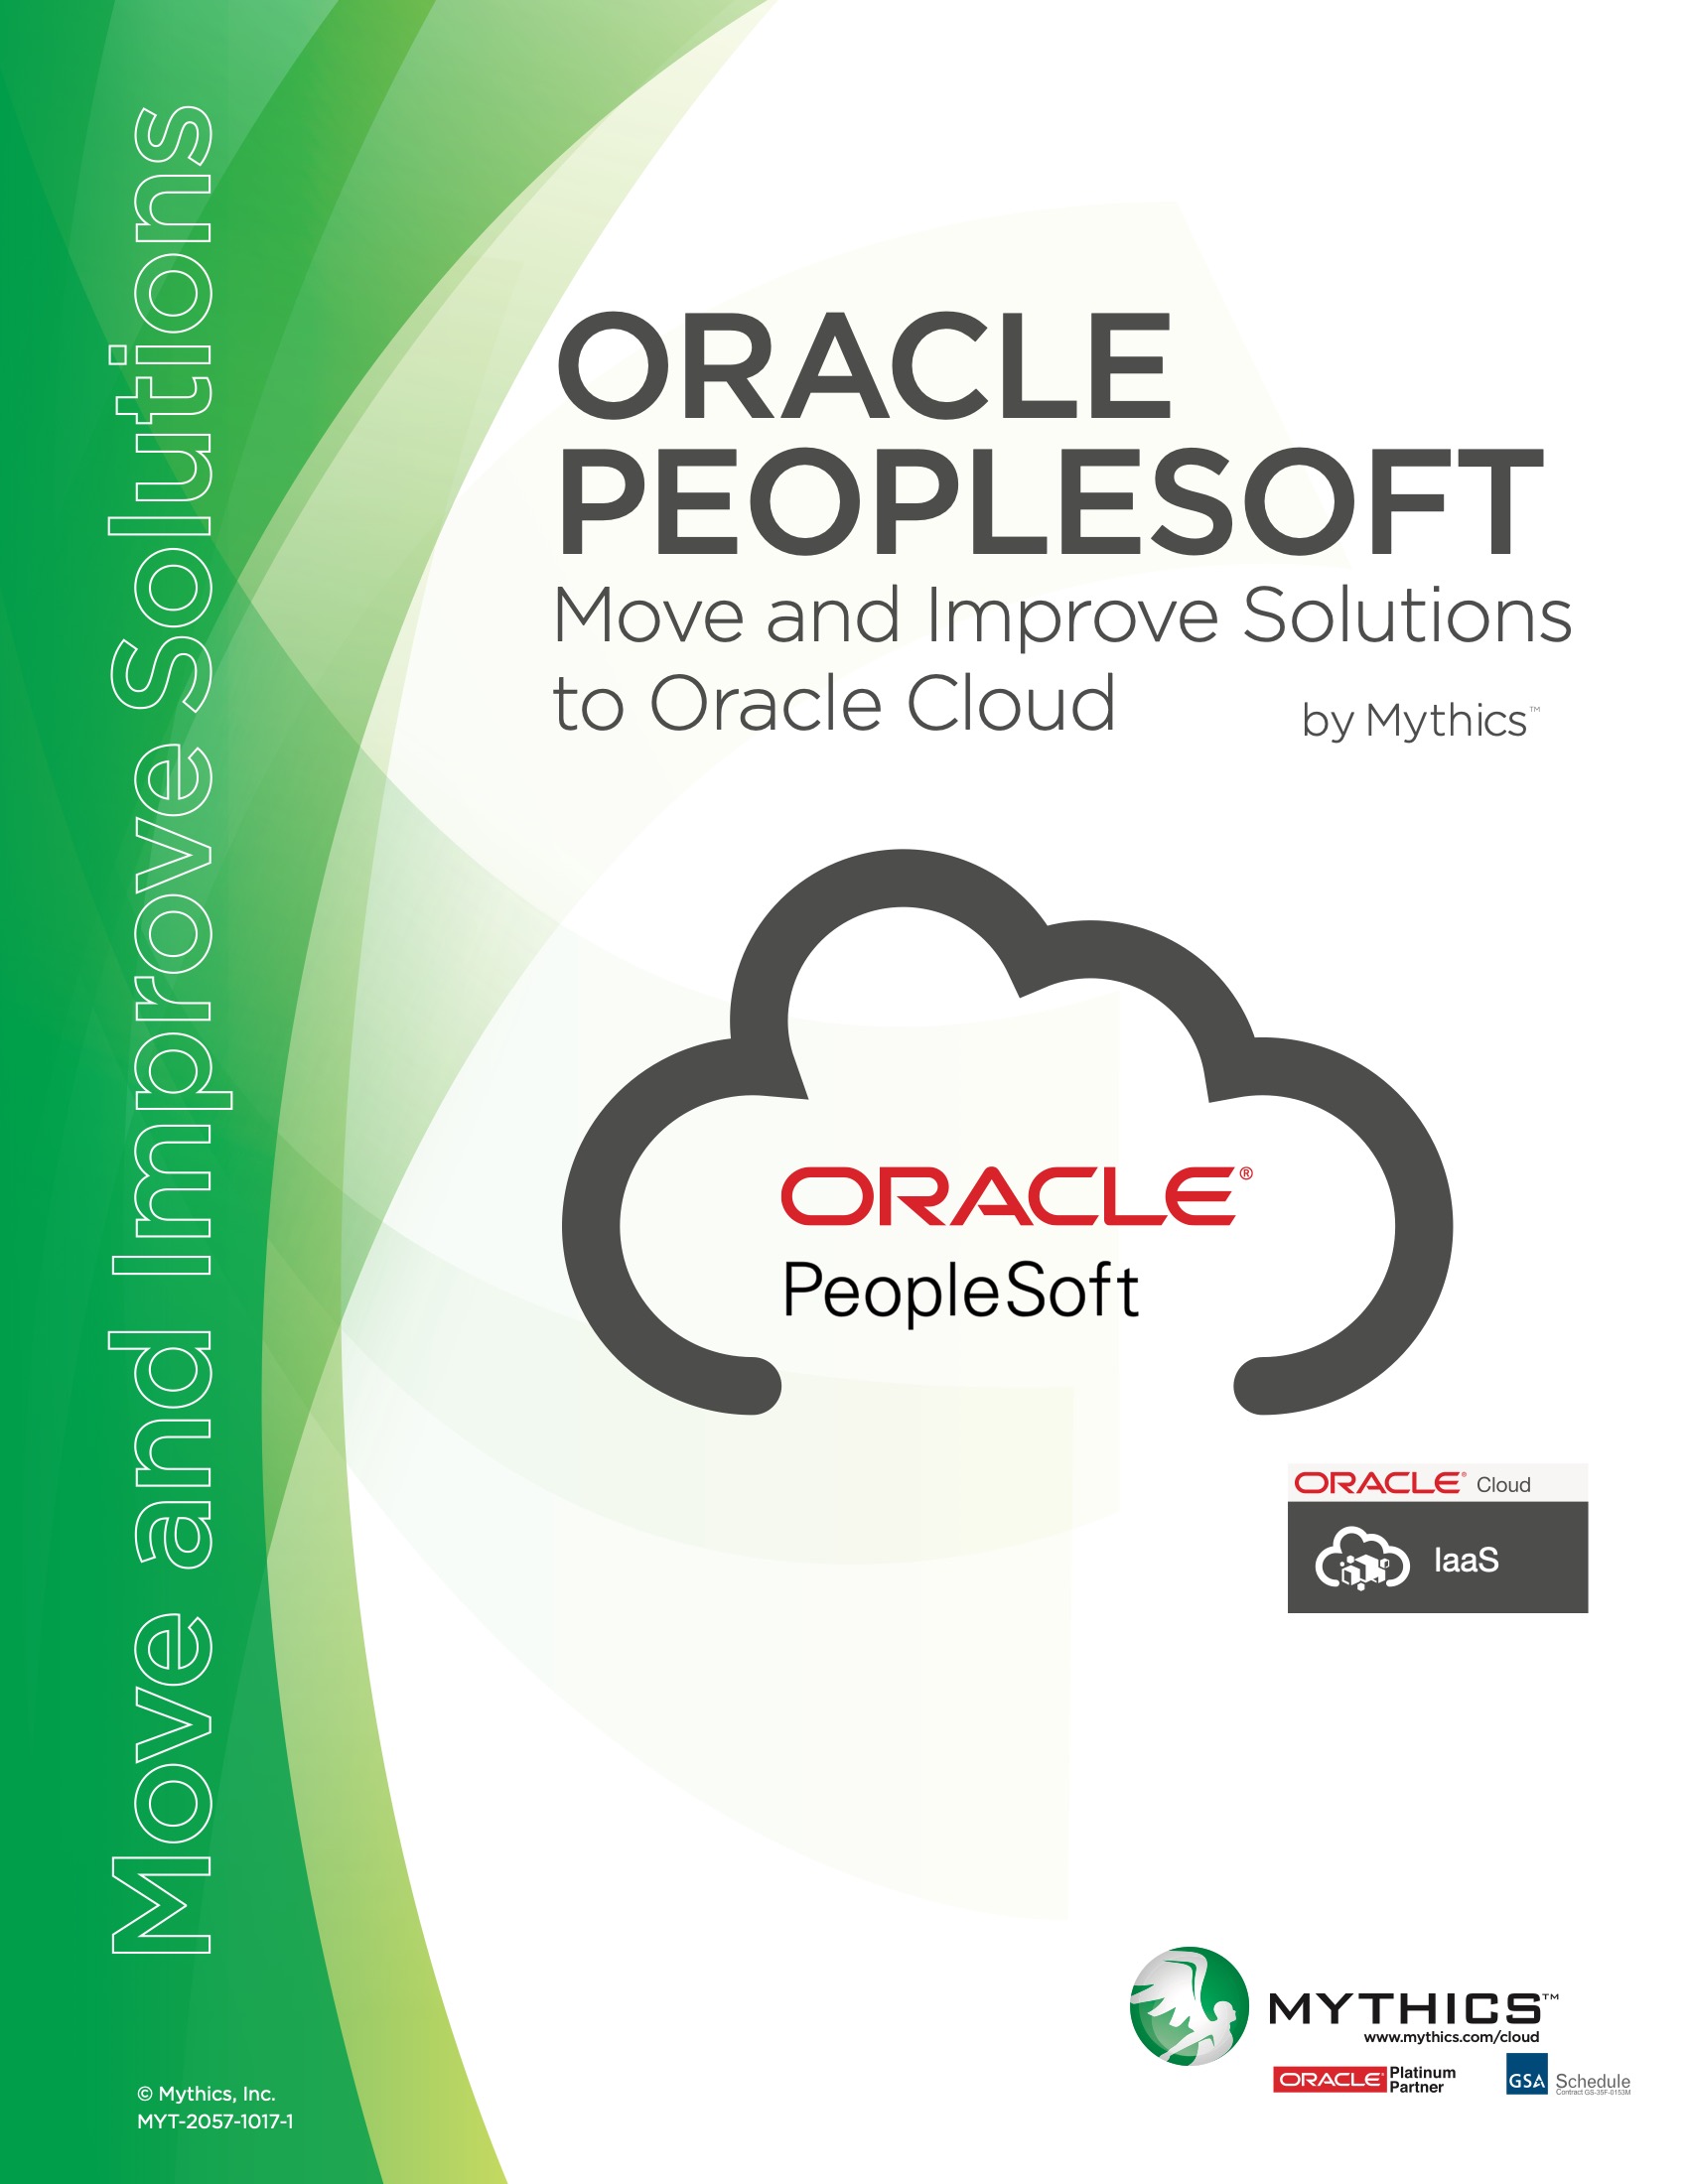 https://mythics.com/wp-content/uploads/2022/06/Mythics_Oracle_PeopleSoft_MIgration_OracleCloud_Brochure-7.jpeg